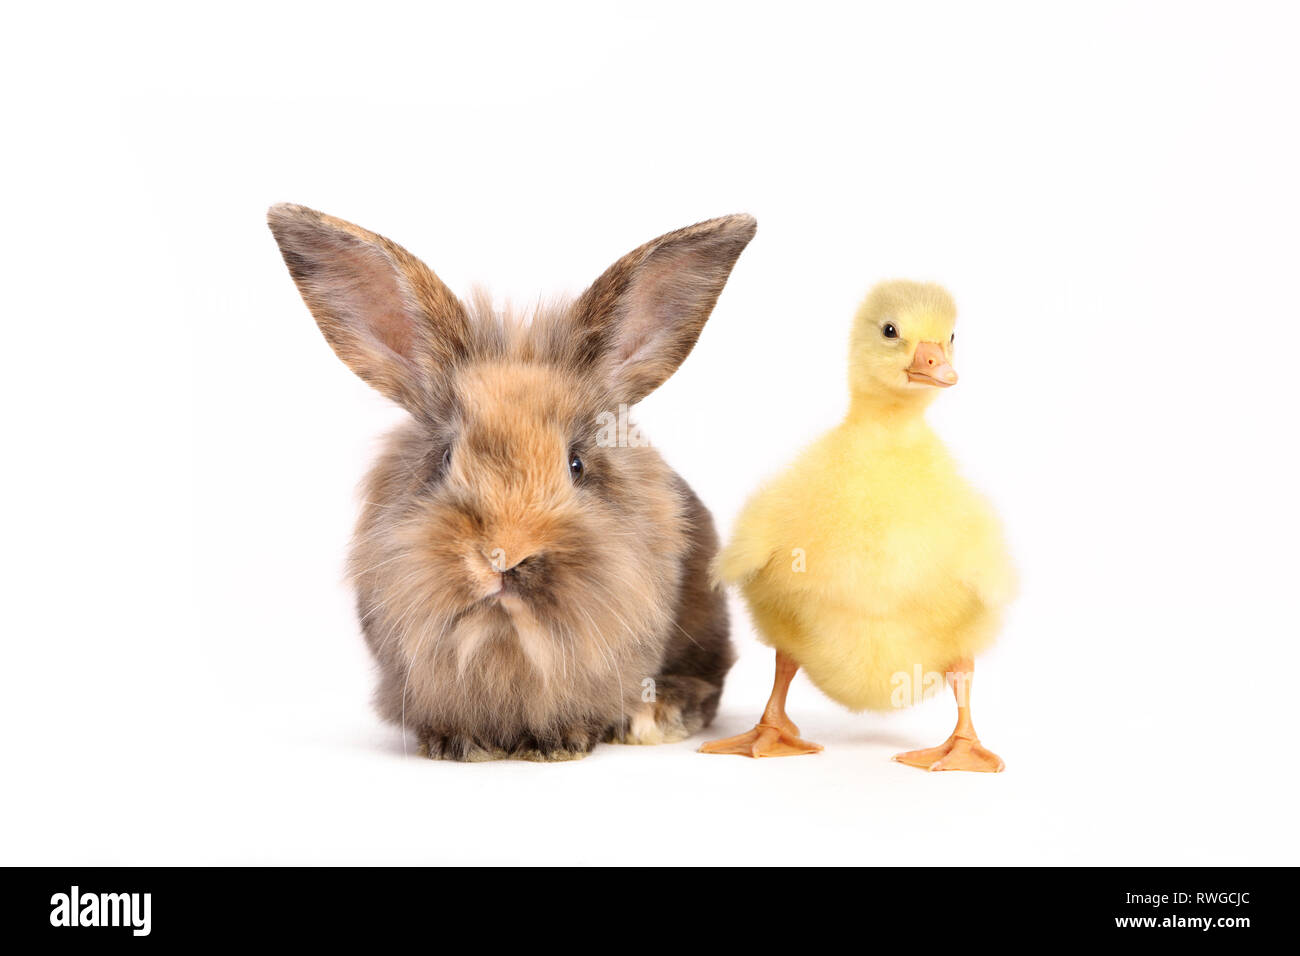 Domestic Goose. Gosling standing next to adult Dwarf Rabbit. Studio picture, seen against a white background. Germany Gans & Kaninchen / goose & rabbit Stock Photo